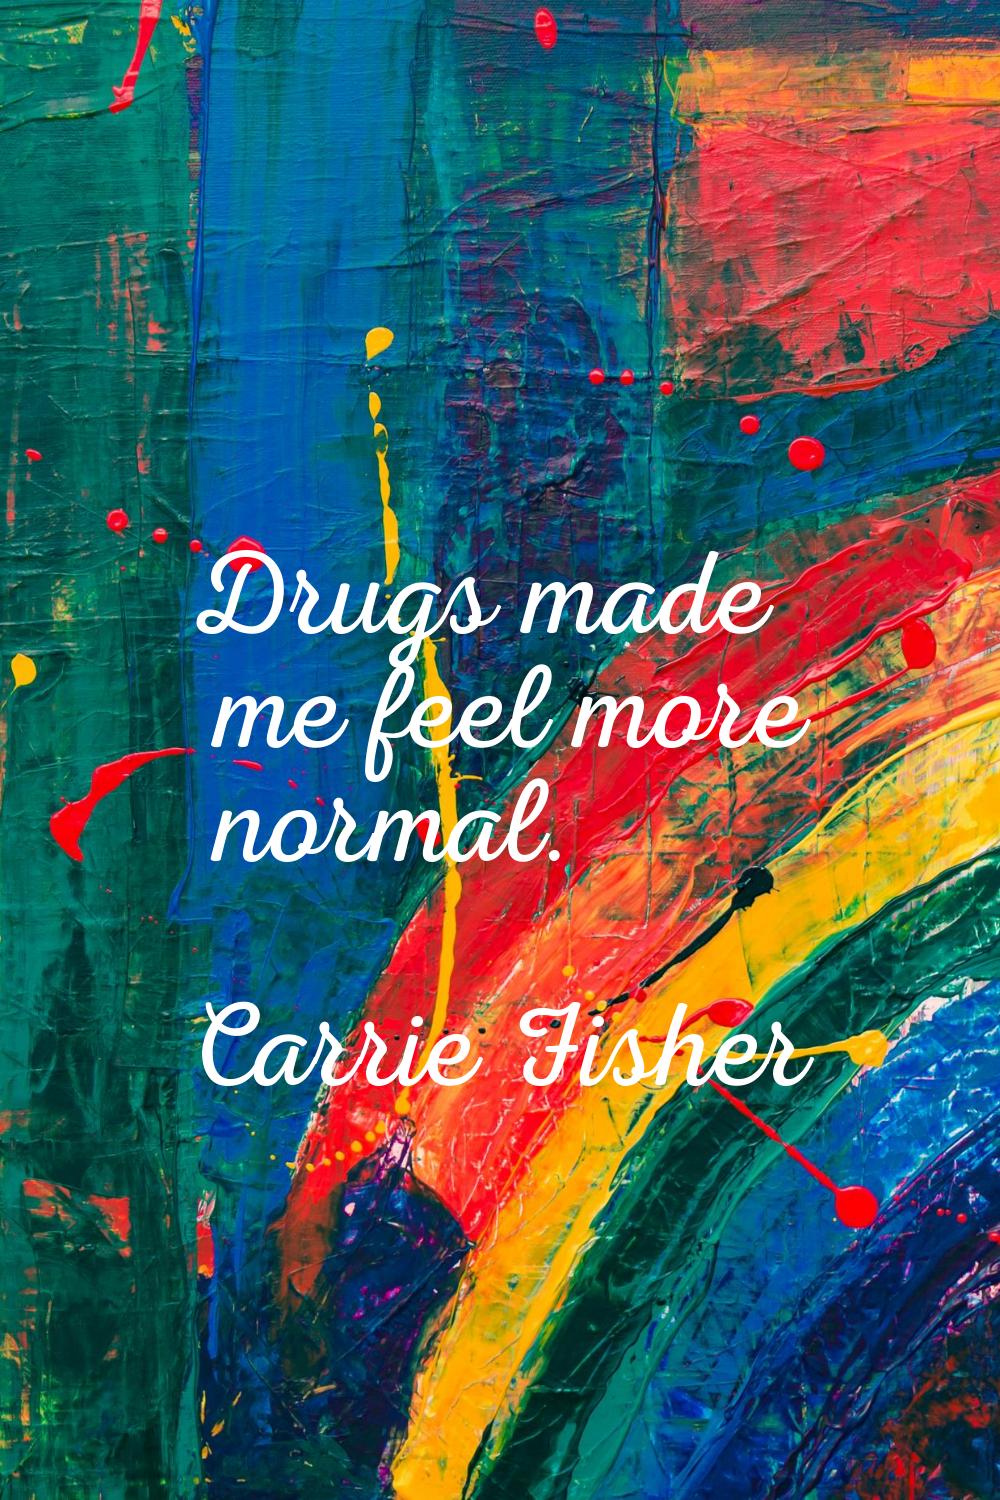 Drugs made me feel more normal.